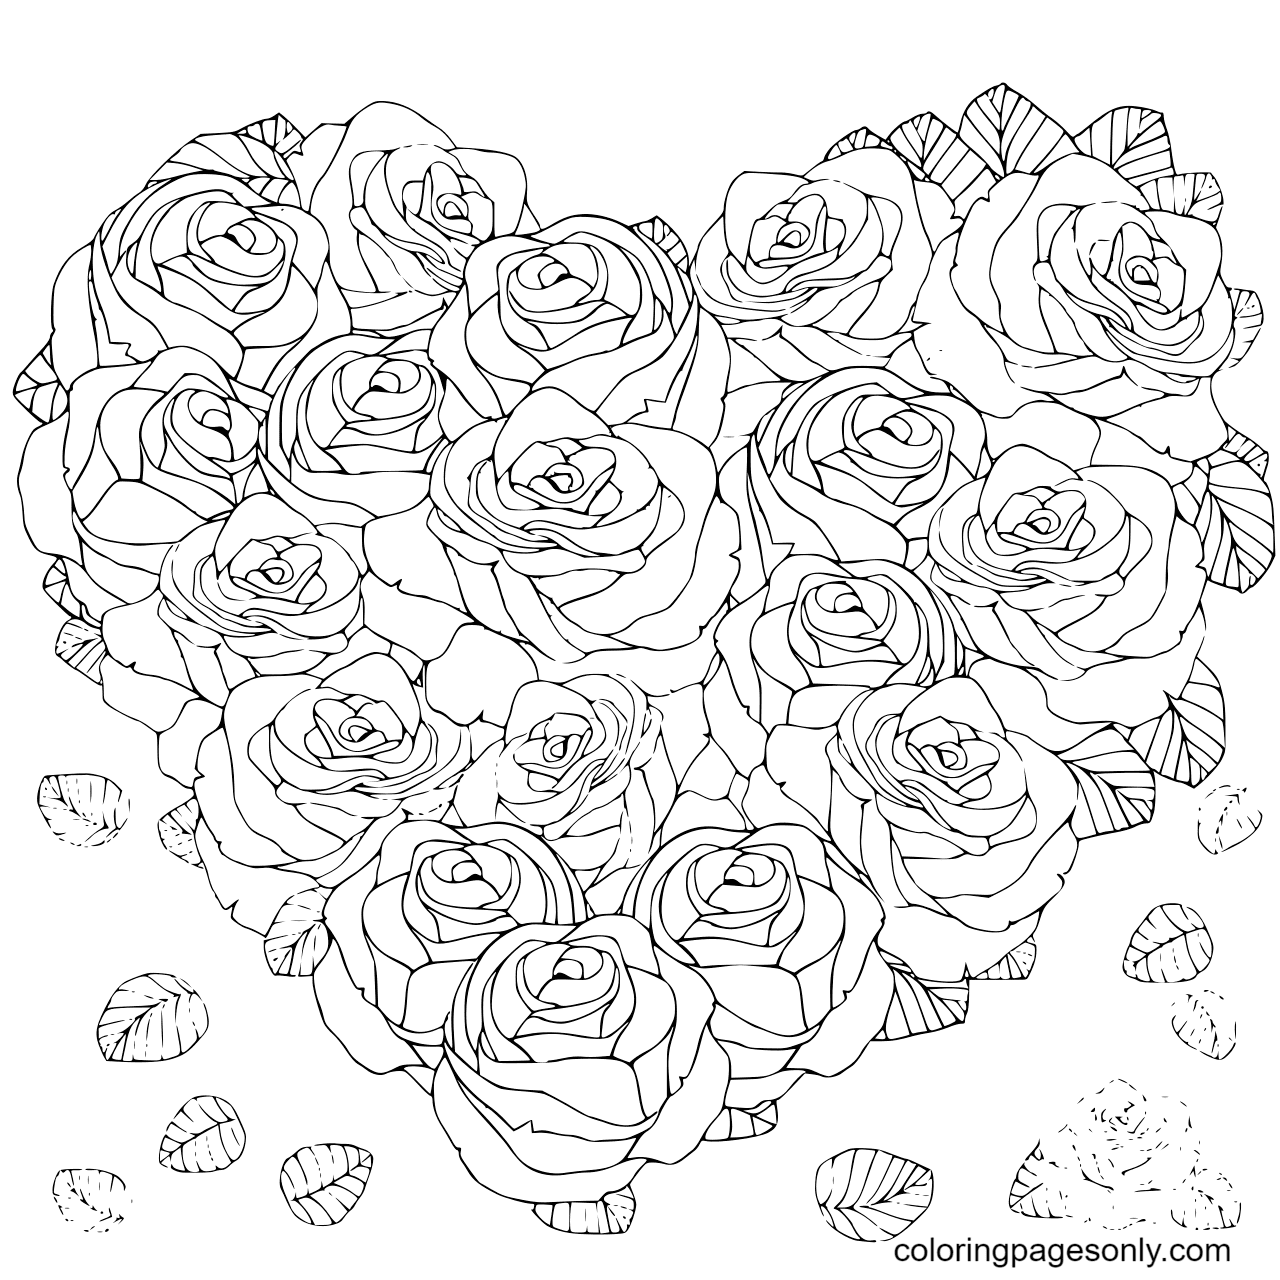 Beautiful Heart Made with Roses Coloring Pages